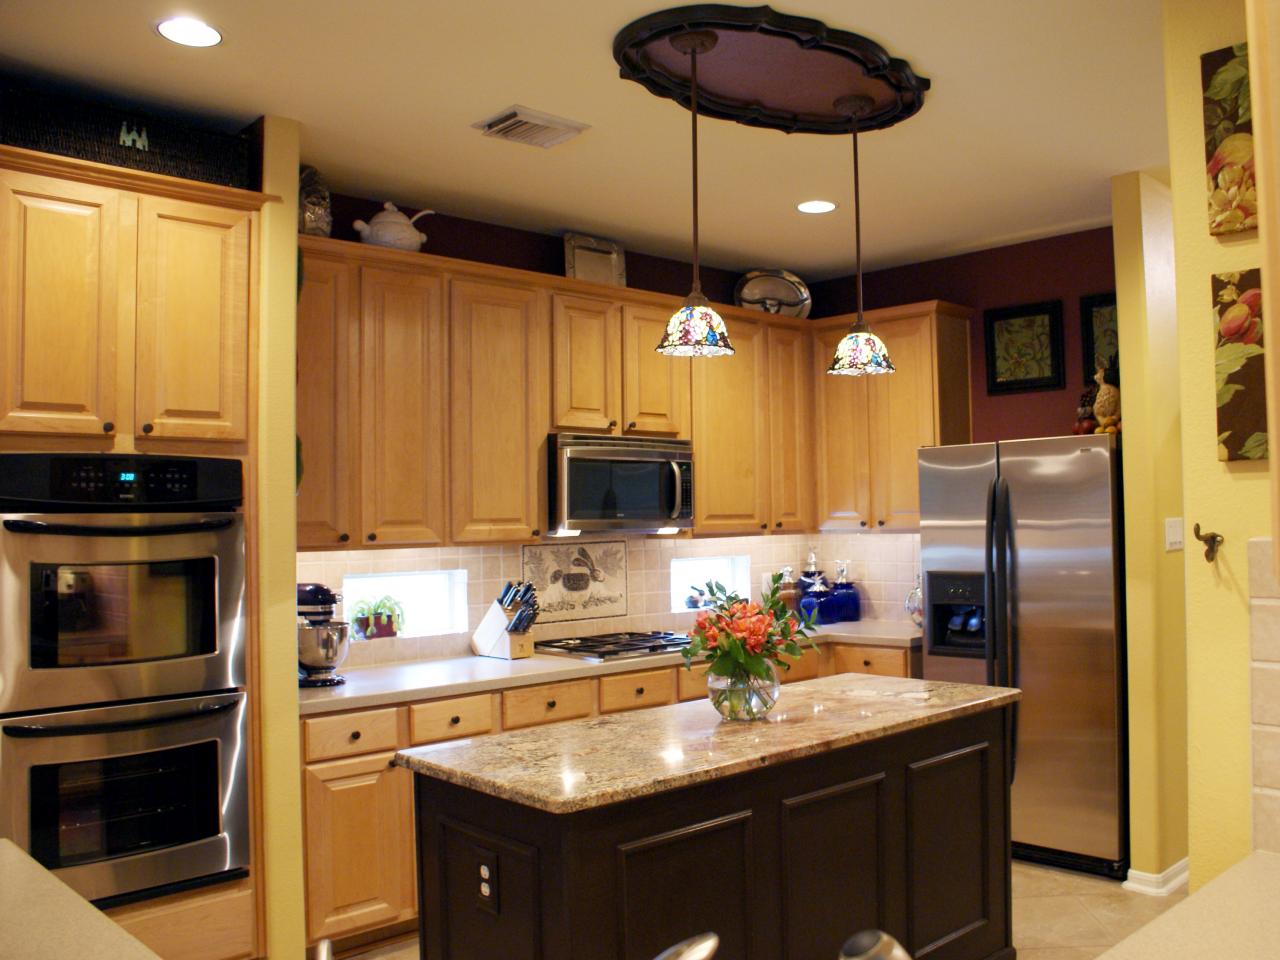 Cabinets Should You Replace Or Reface, Refurbished Kitchen Cabinet Doors Ideas